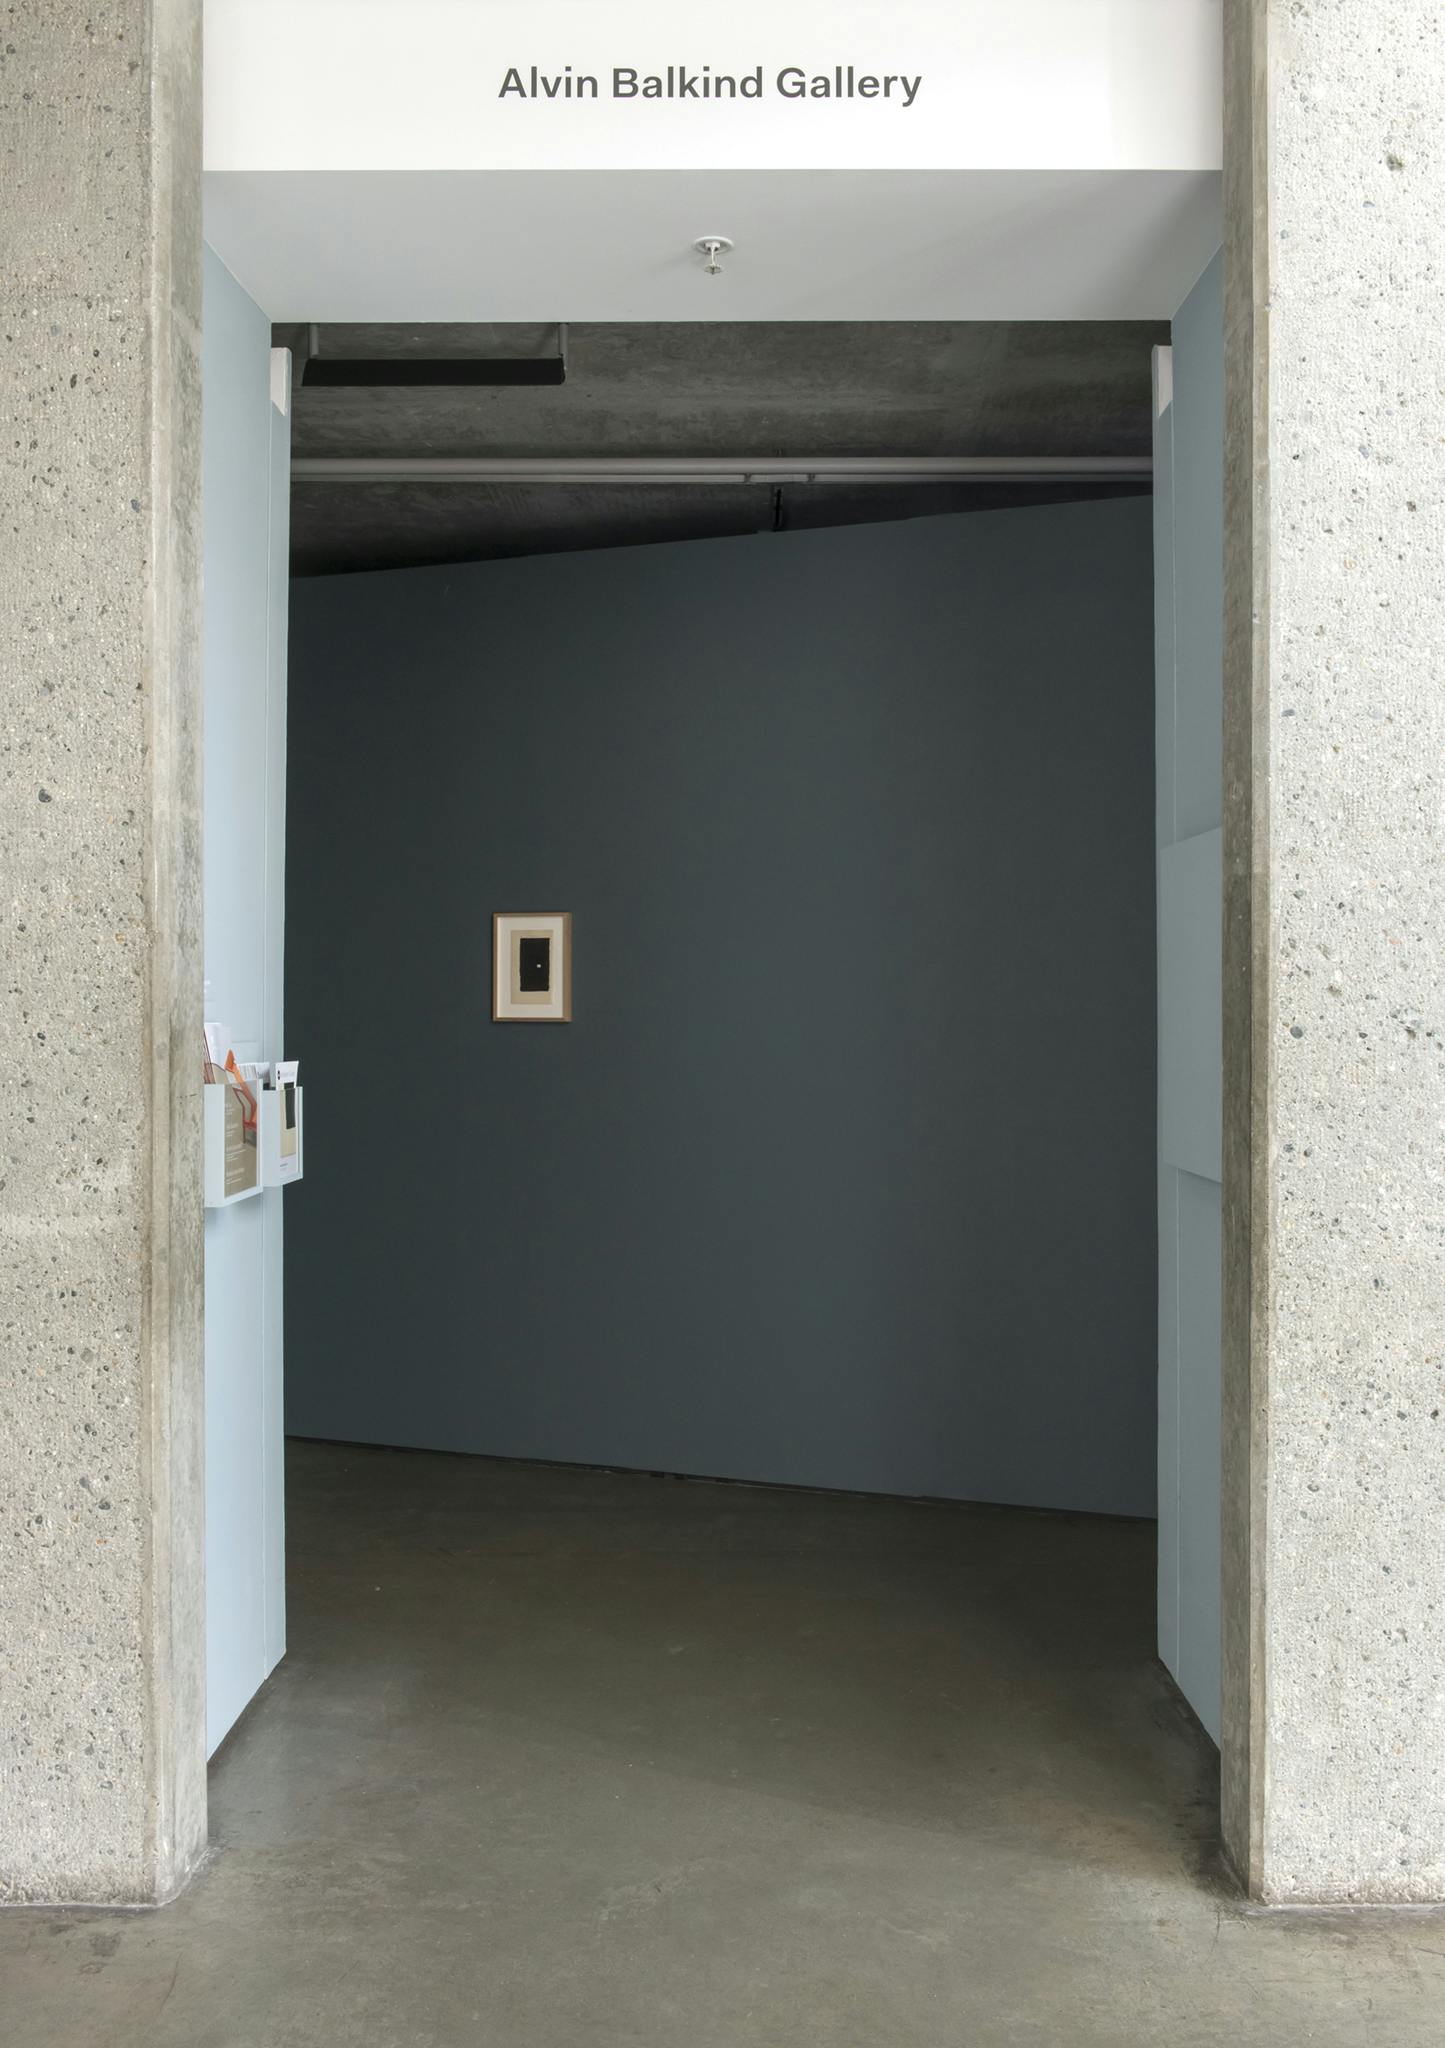 A short hallway leading into a gallery is depicted in this image. A blue-grey wall is visible at the end of this hallway. A small, two-dimensional framed artwork is installed on this wall.